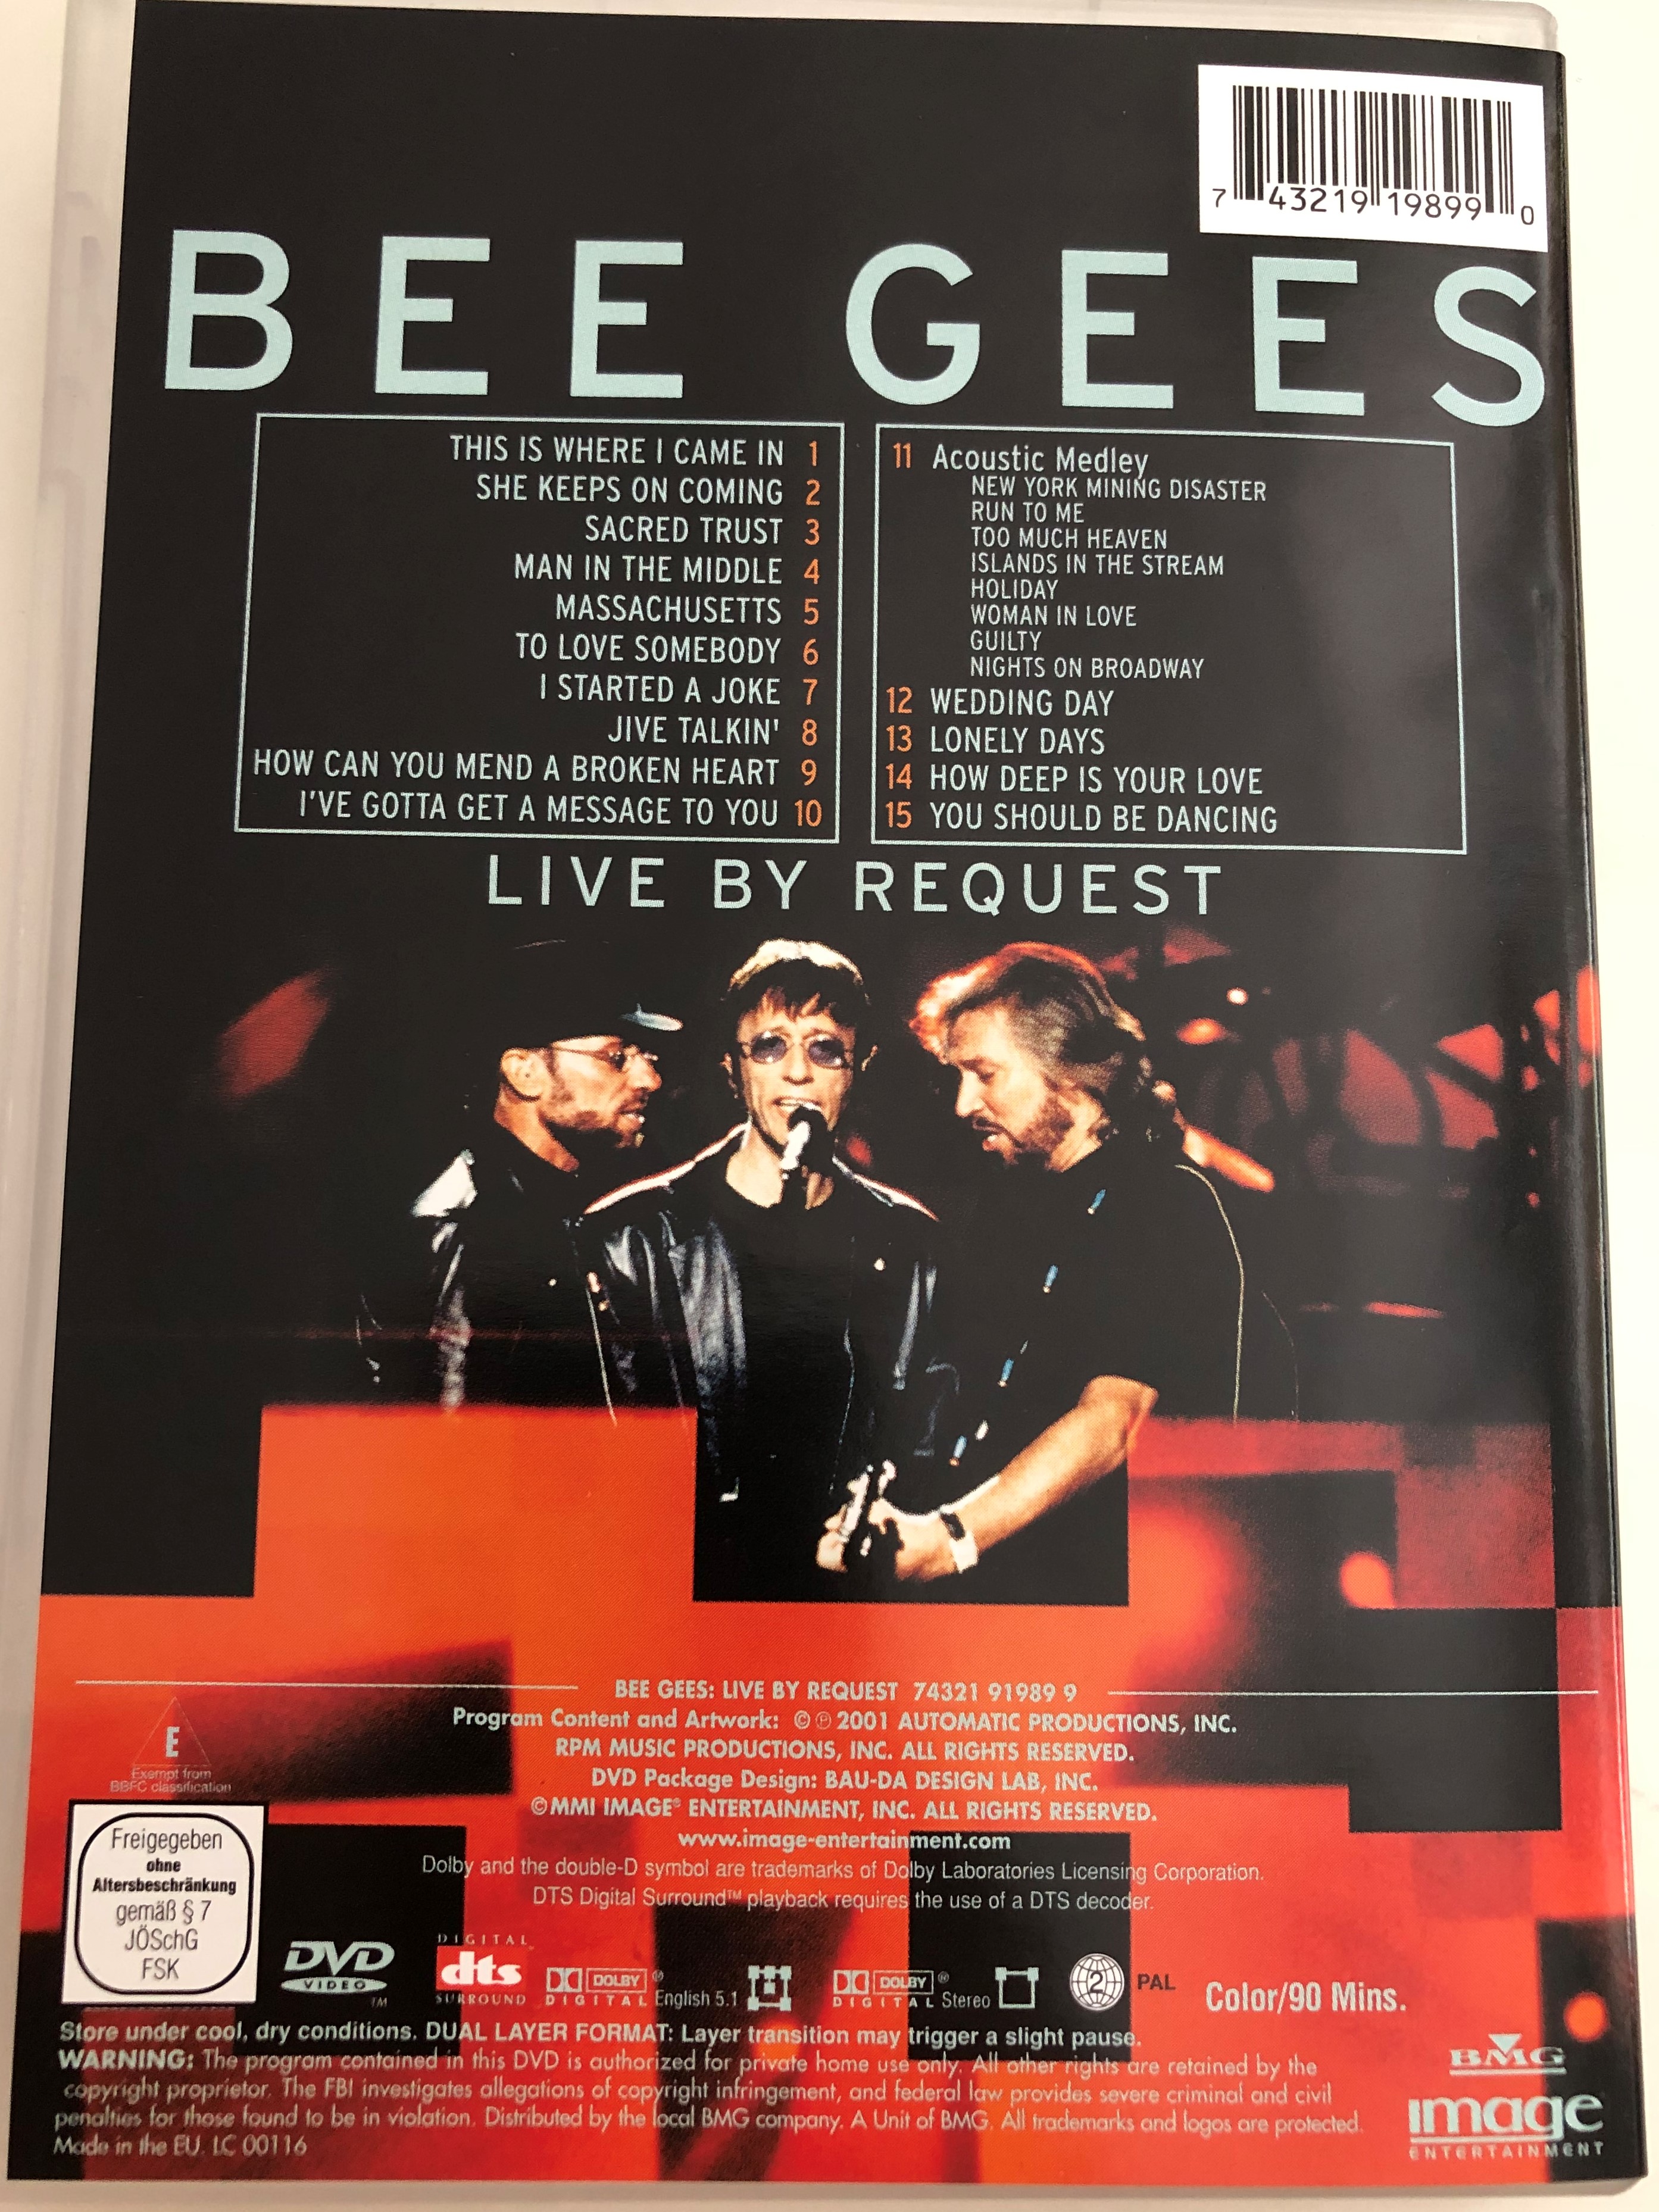 Bee Gees - Live by request DVD 2001 / Sacred Trust, Man in the Middle, How  Can you mend a broken Heart / BMG - bibleinmylanguage